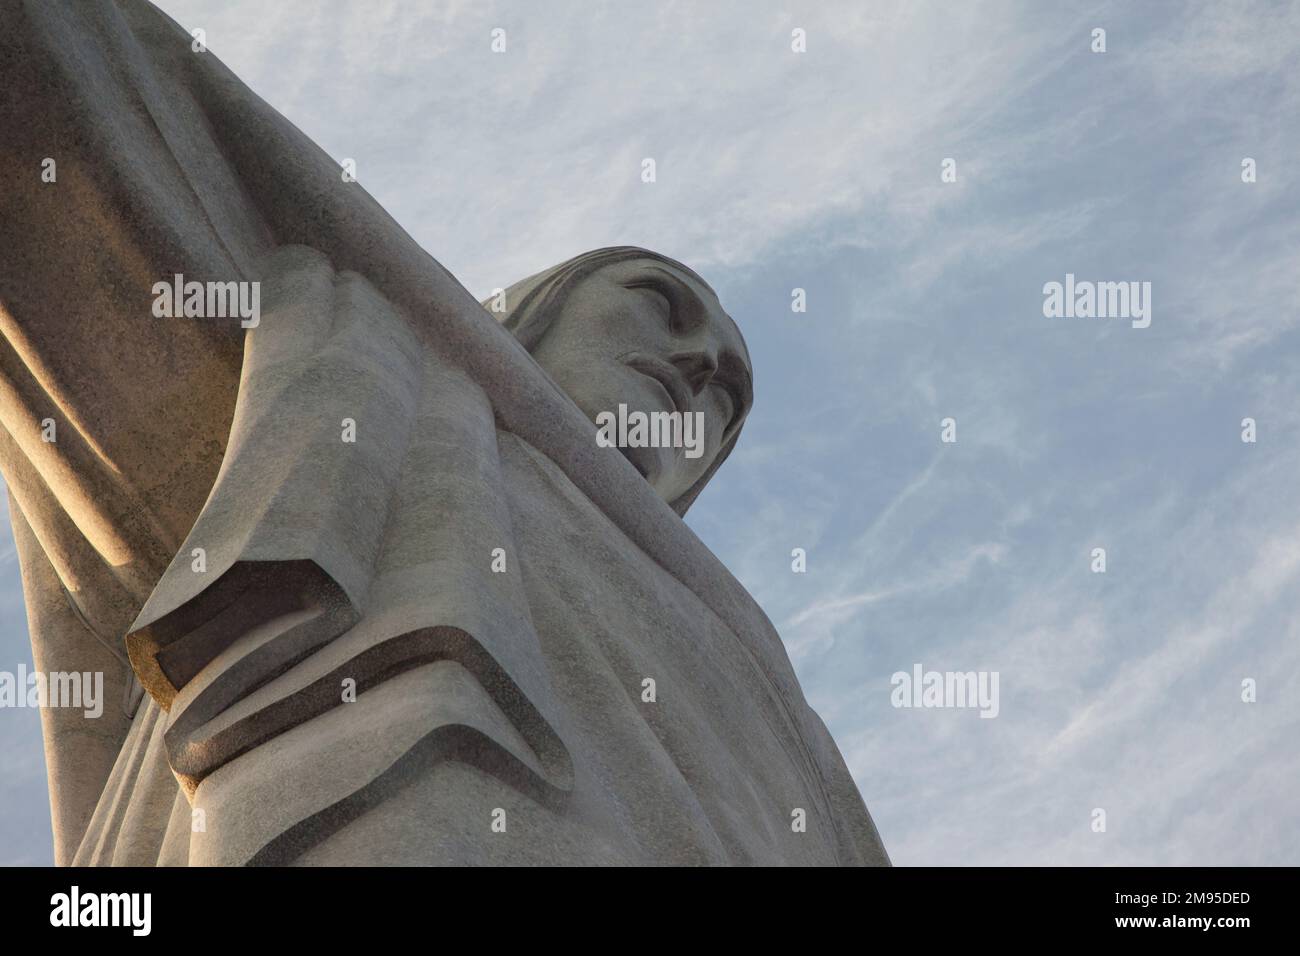 Brazil, Rio, the statue of Cristo Redentor (Christ the Redeemer) the worlds largest Art Deco Monument. Stock Photo